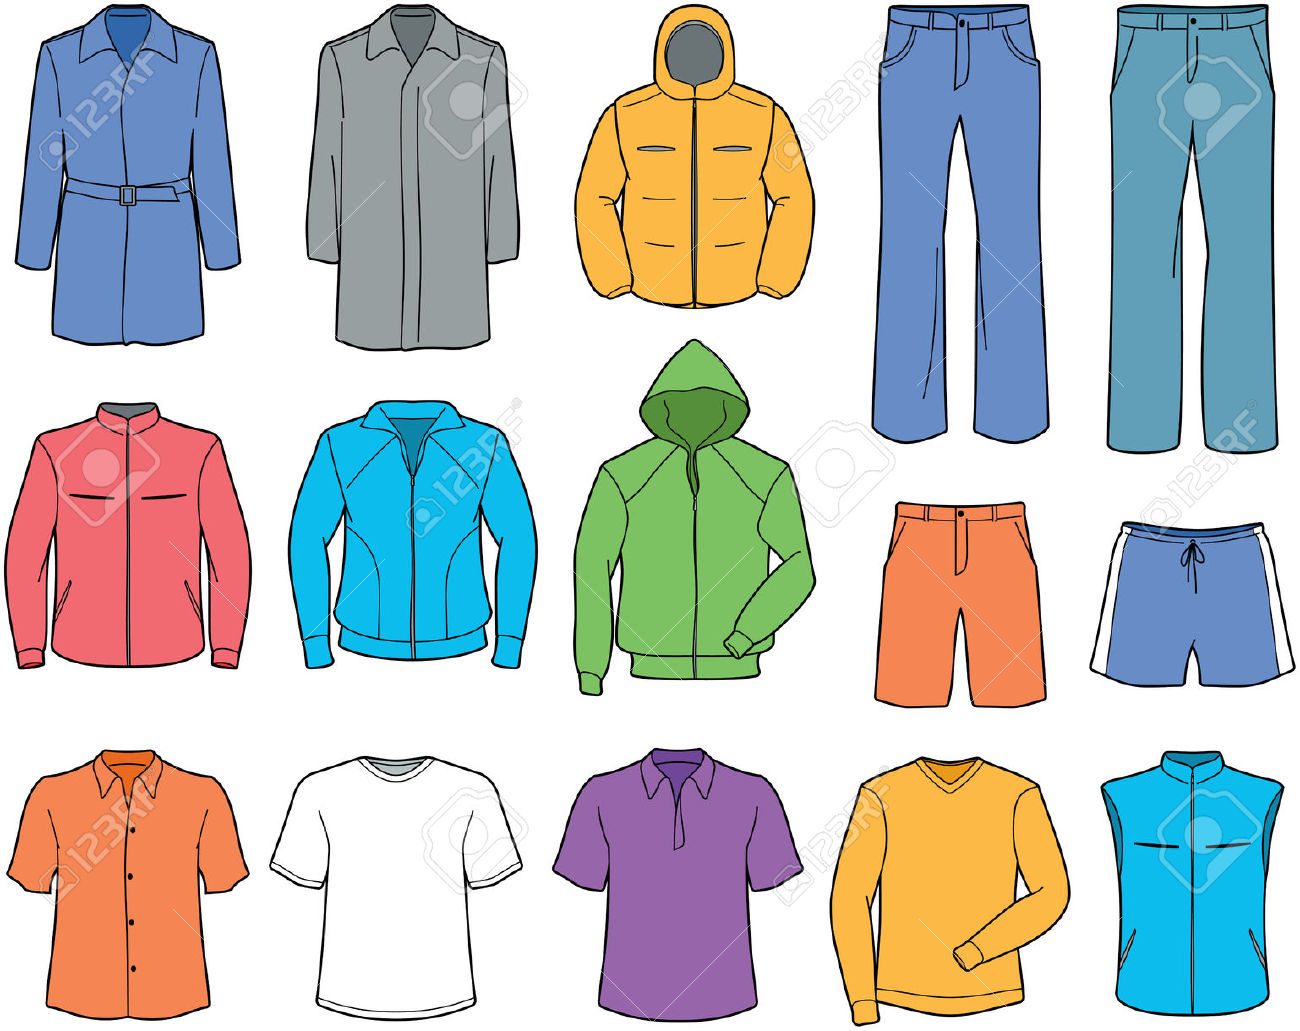 Free clothing clipart 4 » Clipart Station.